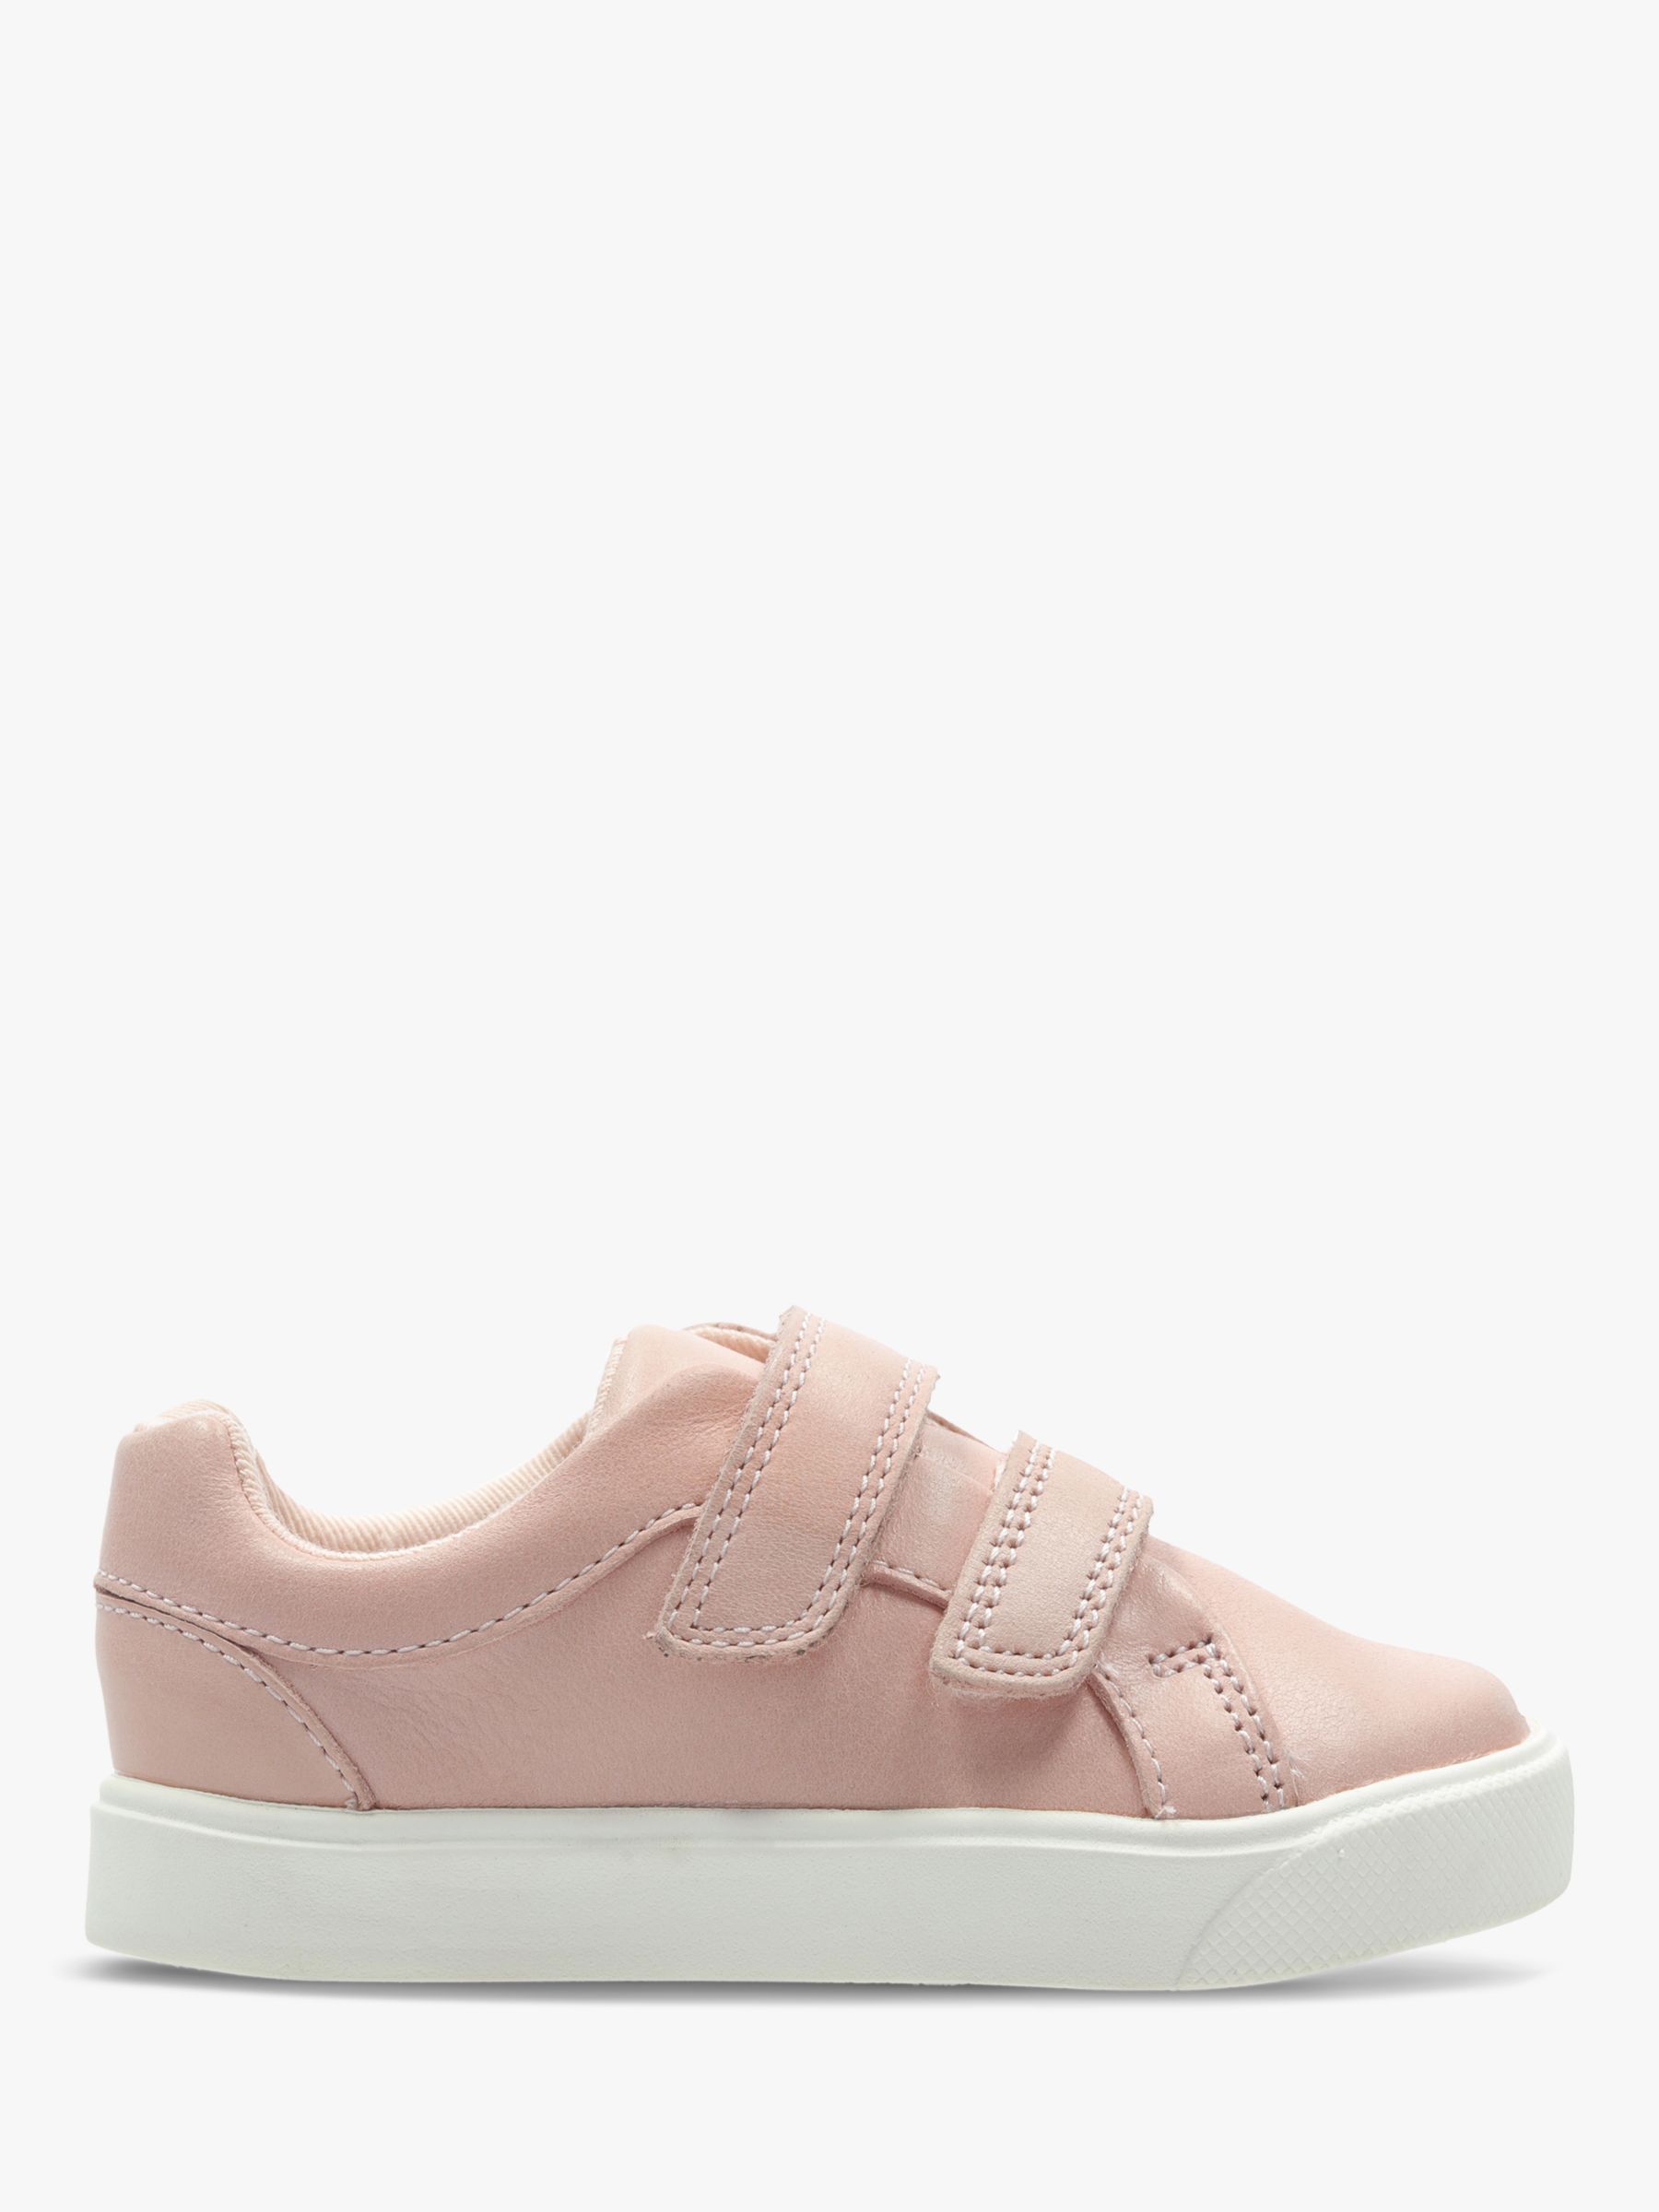 Clarks Junior City Oasis Shoes, Pink at 